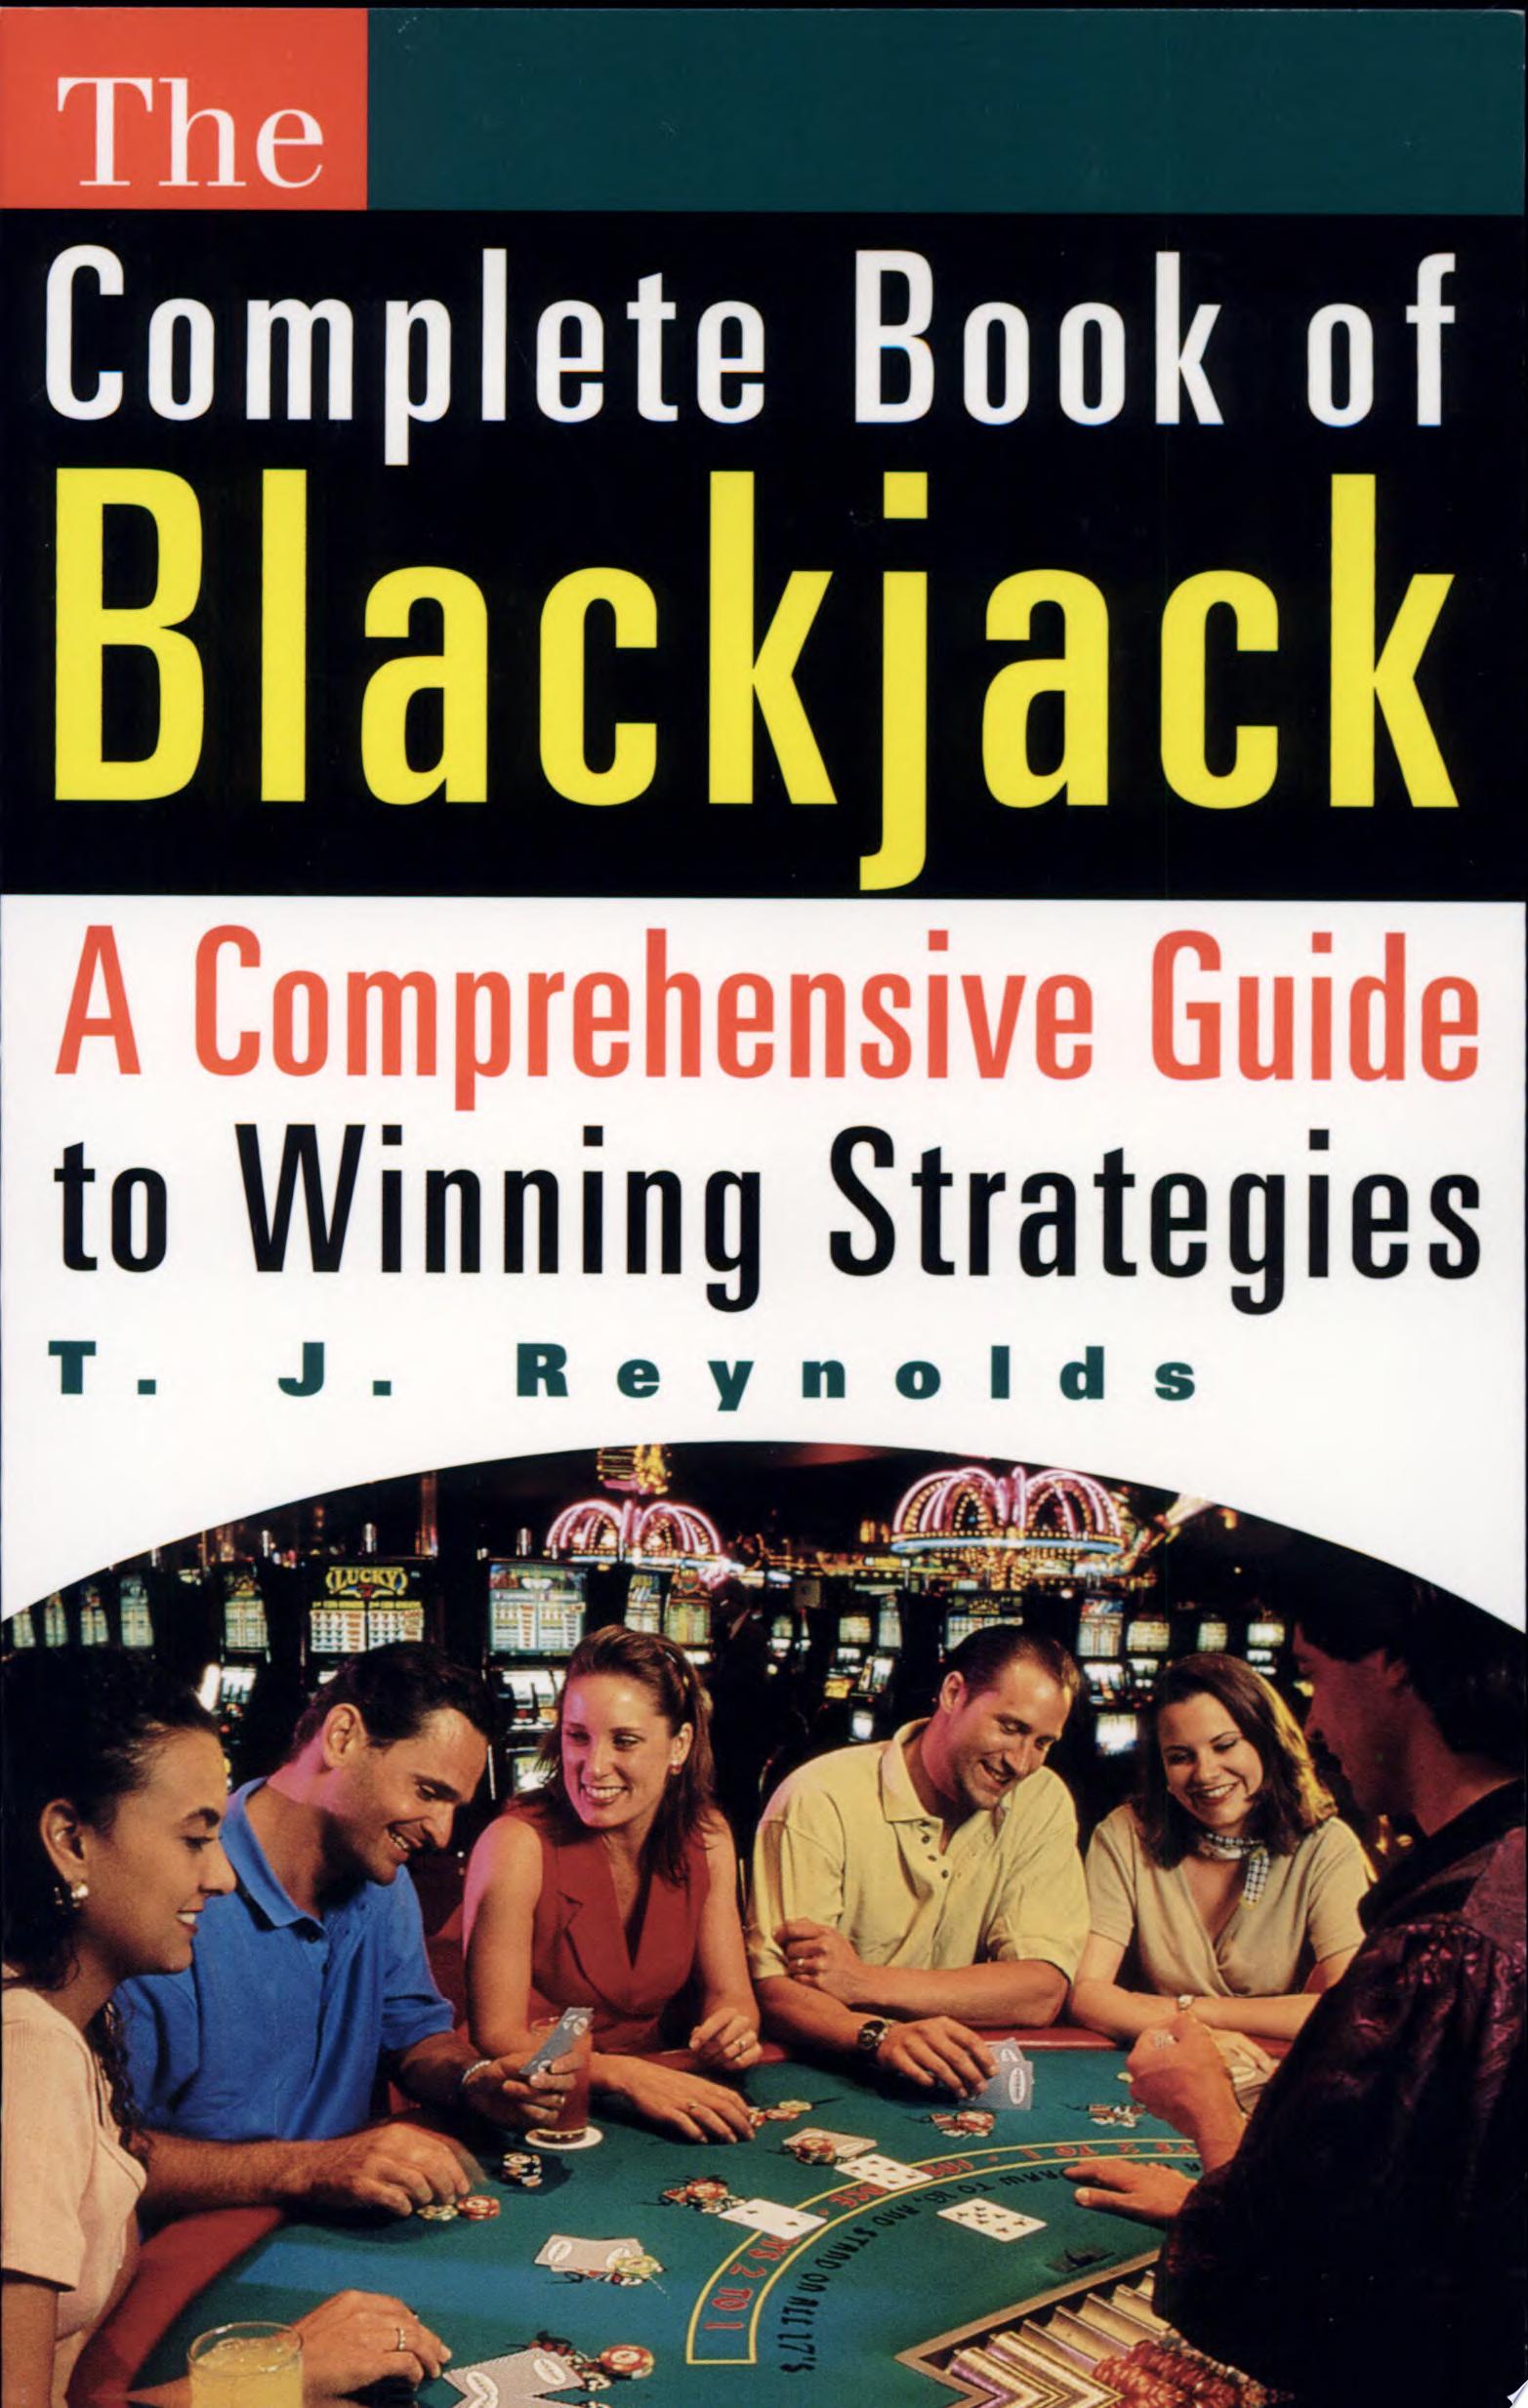 Image for "The Complete Book of Blackjack"